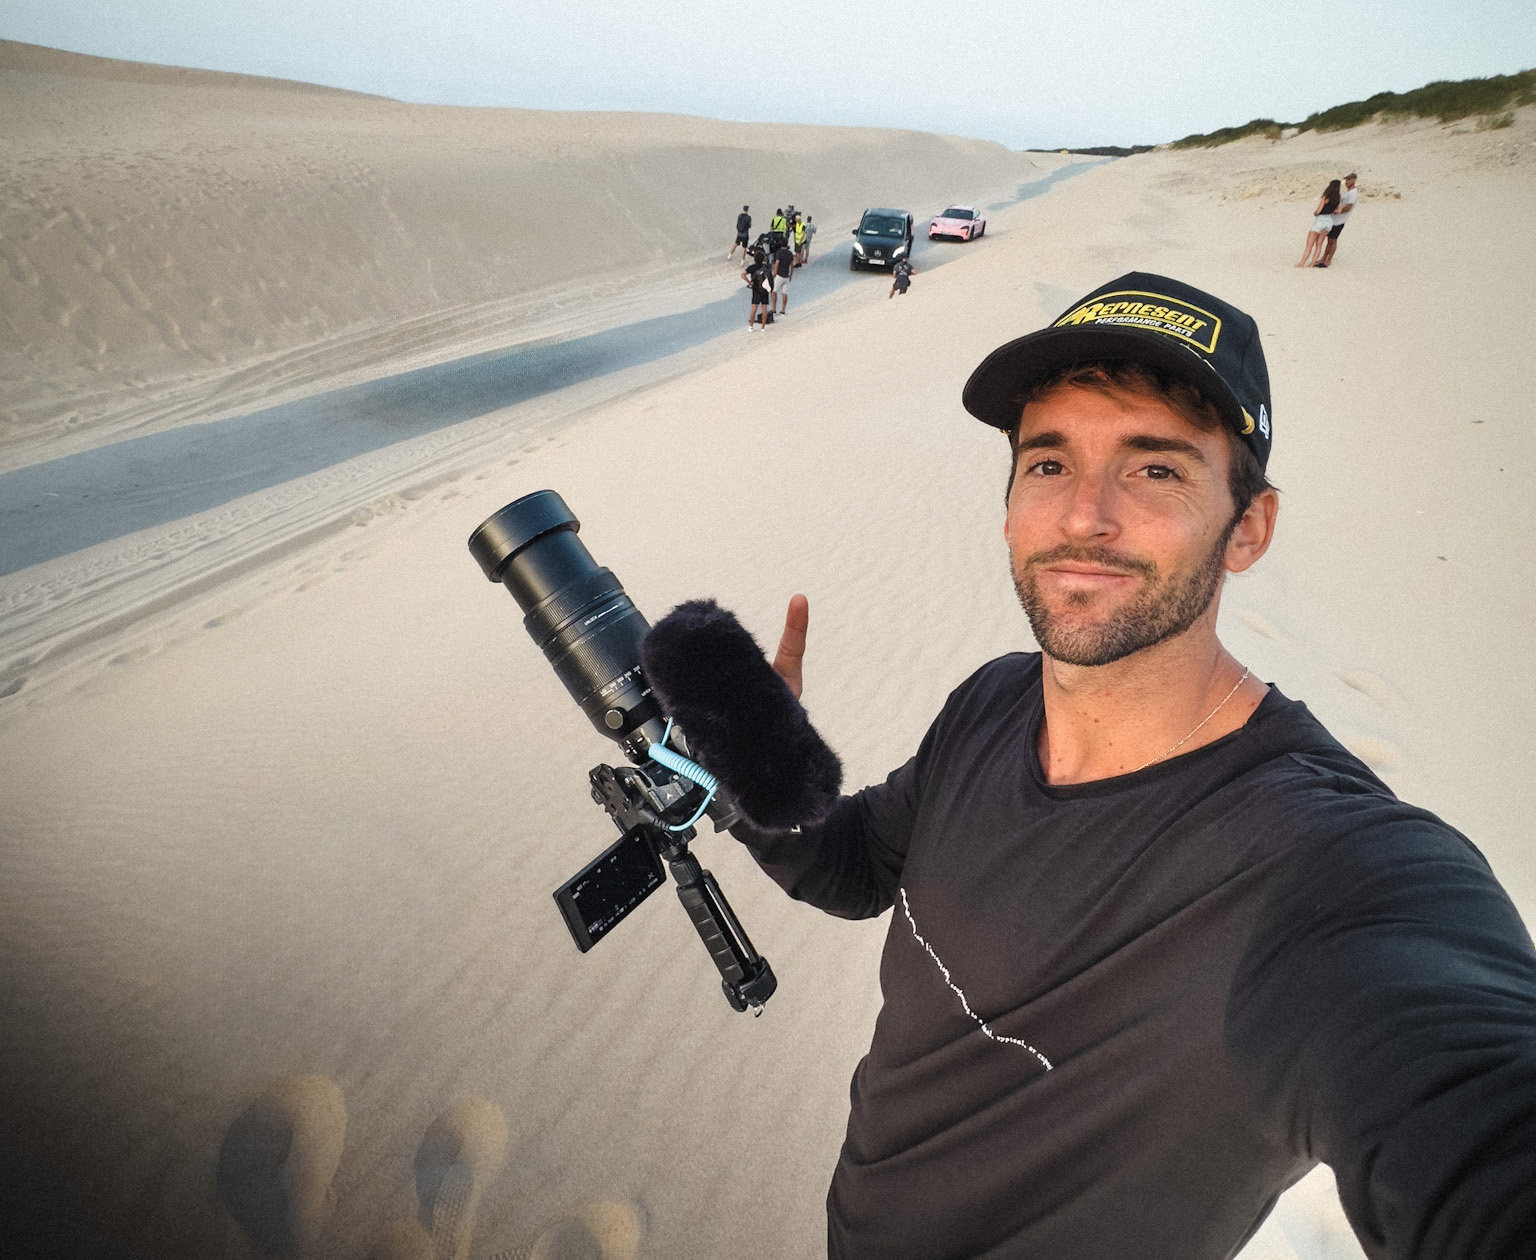 Man holding camera, people, cars and sand dunes behind him